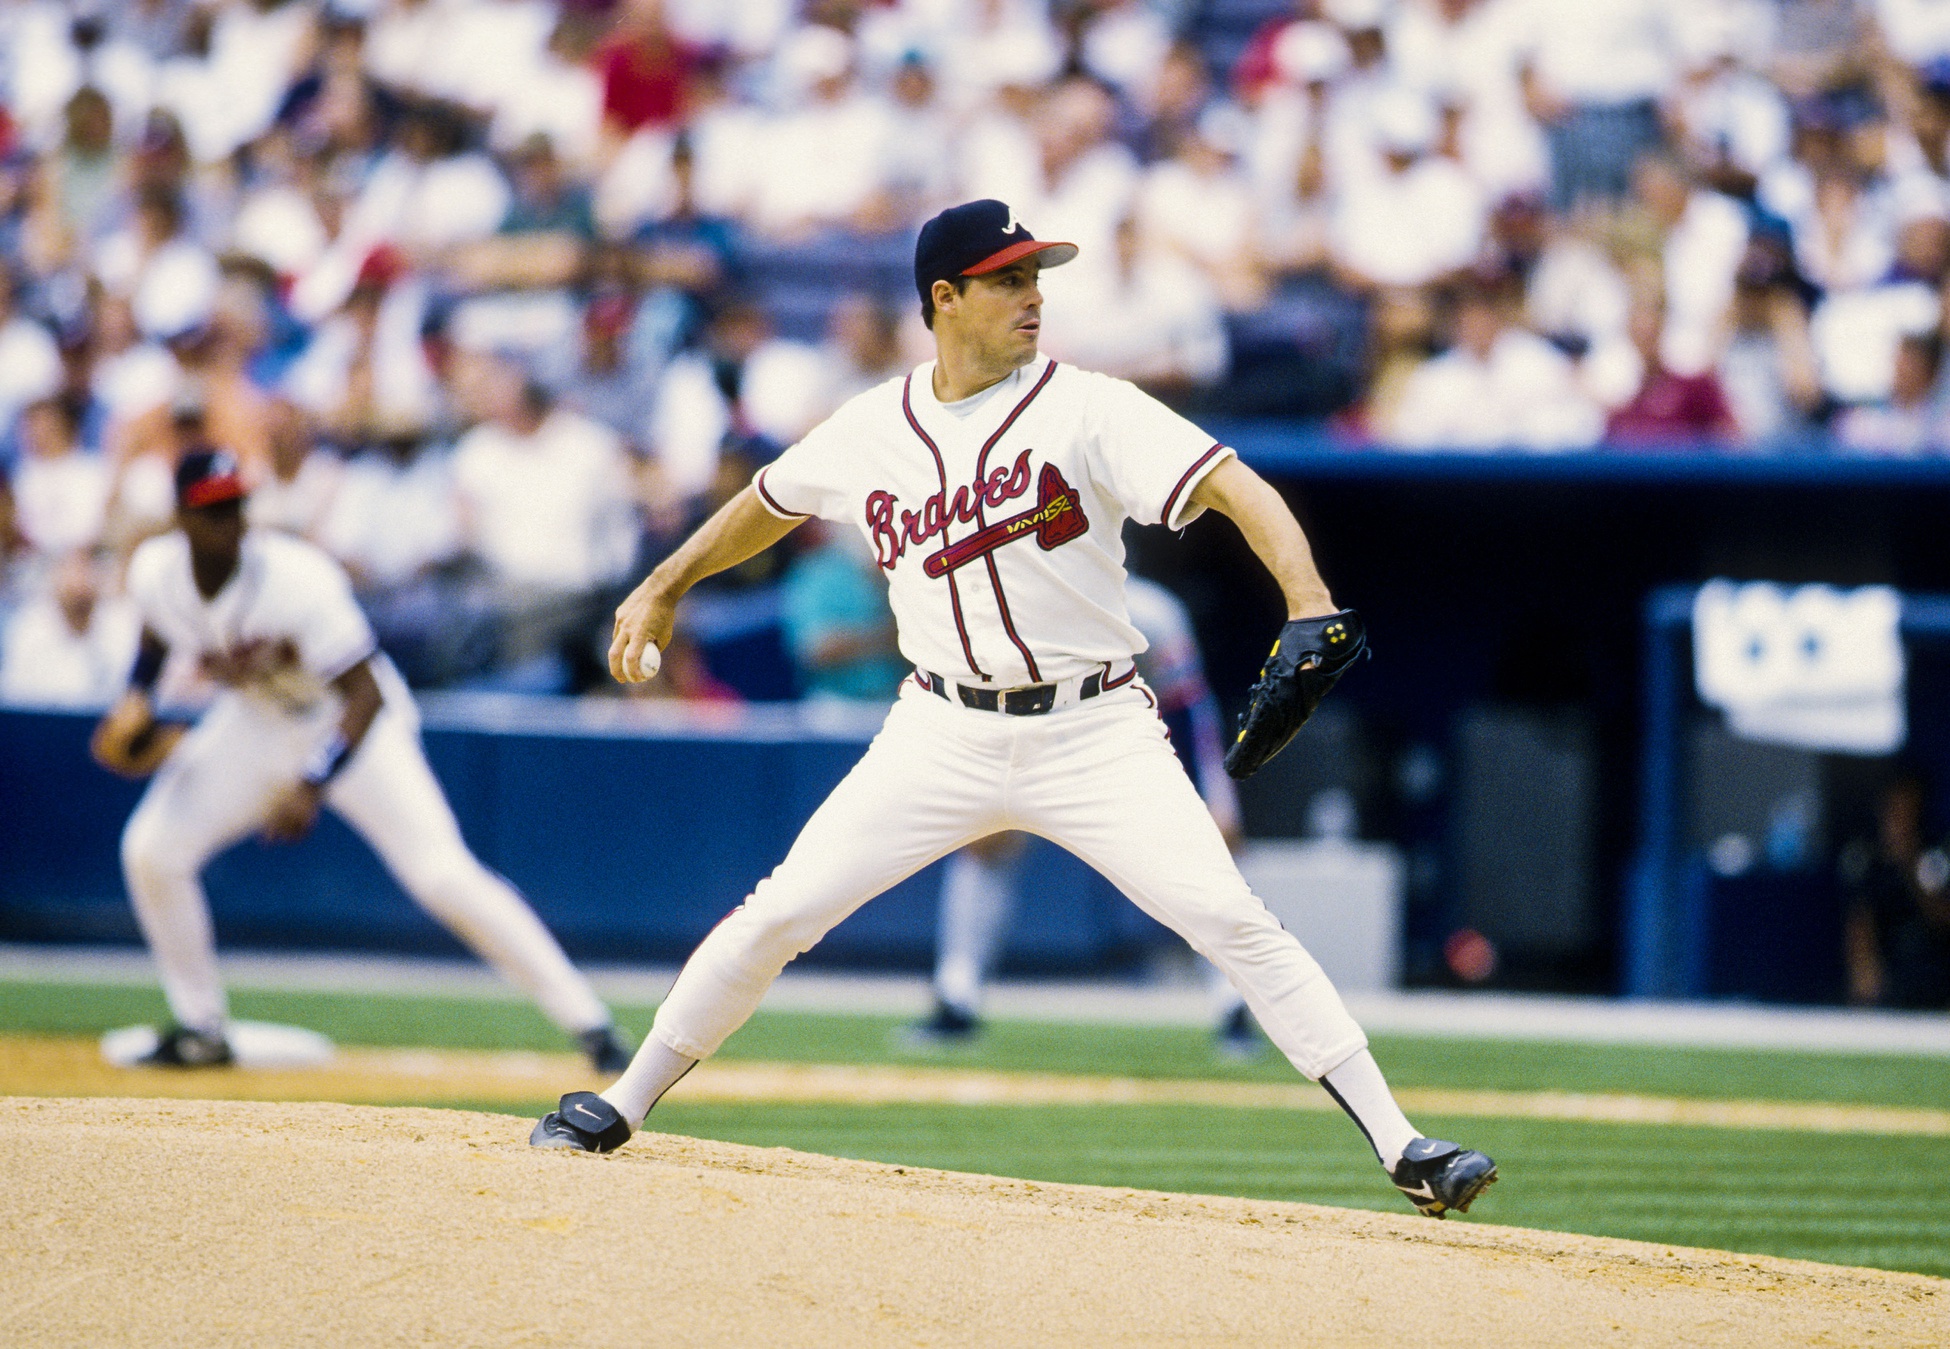 Greg Maddux (MLB Pitching Legend) - On This Day